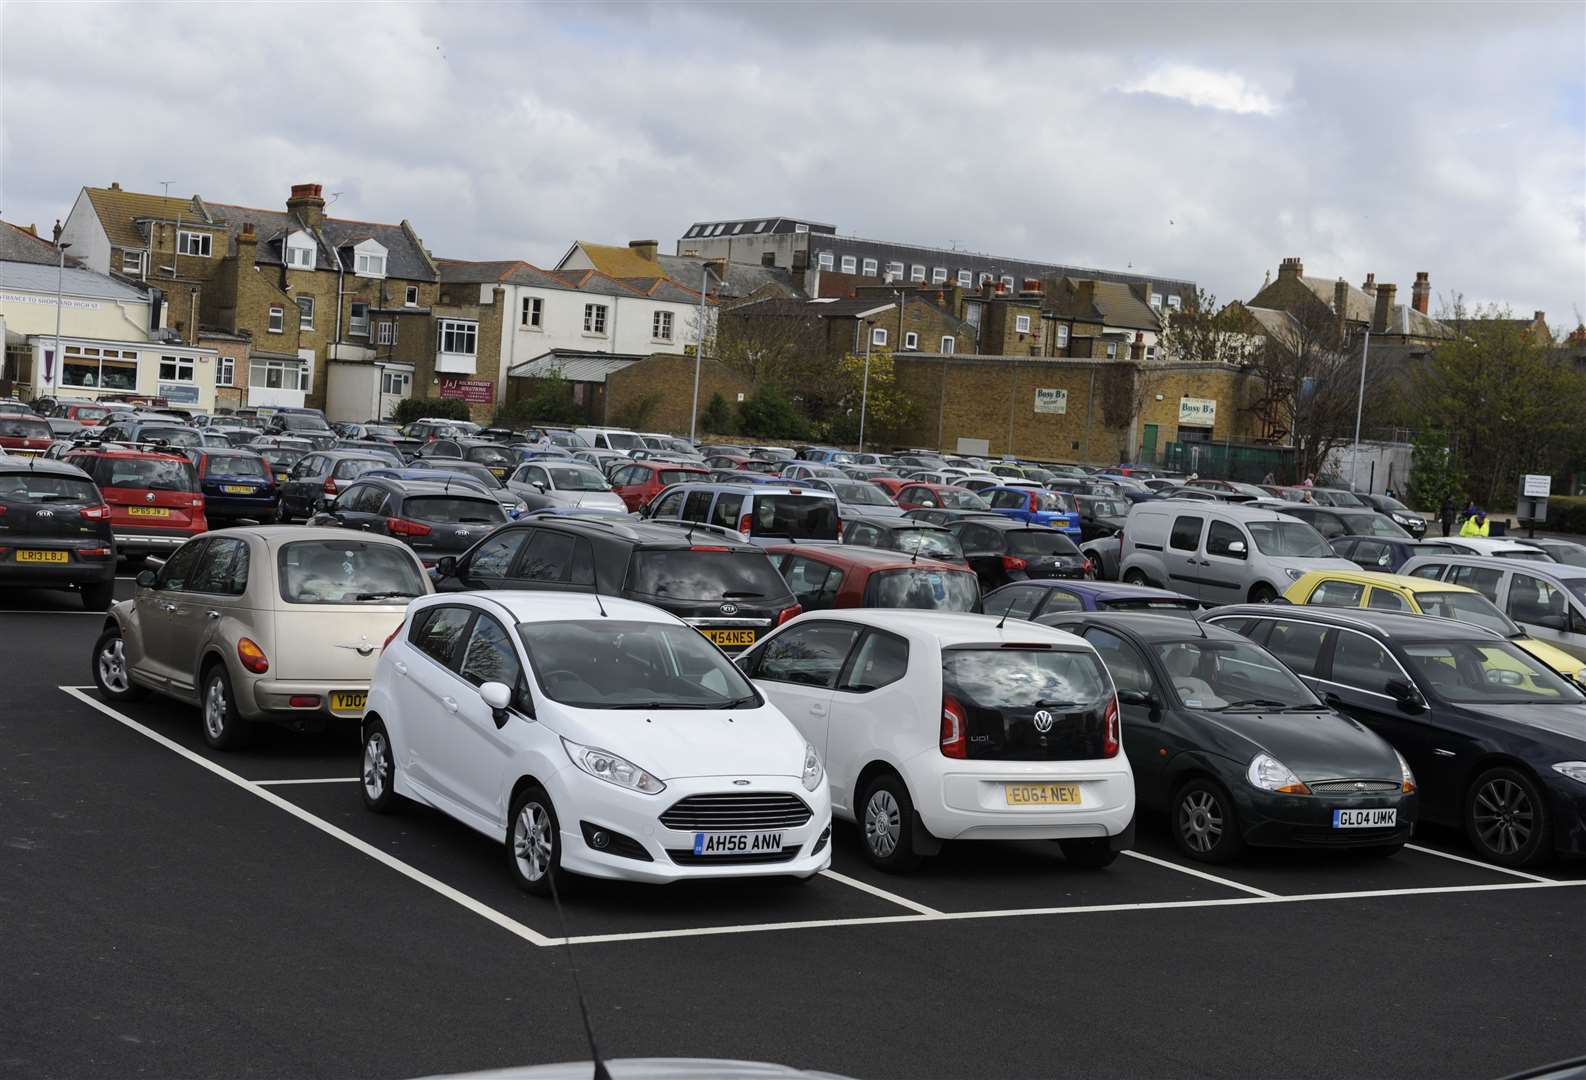 William Street car park in Herne Bay is one of the sites included in the discount offered by Canterbury City Council